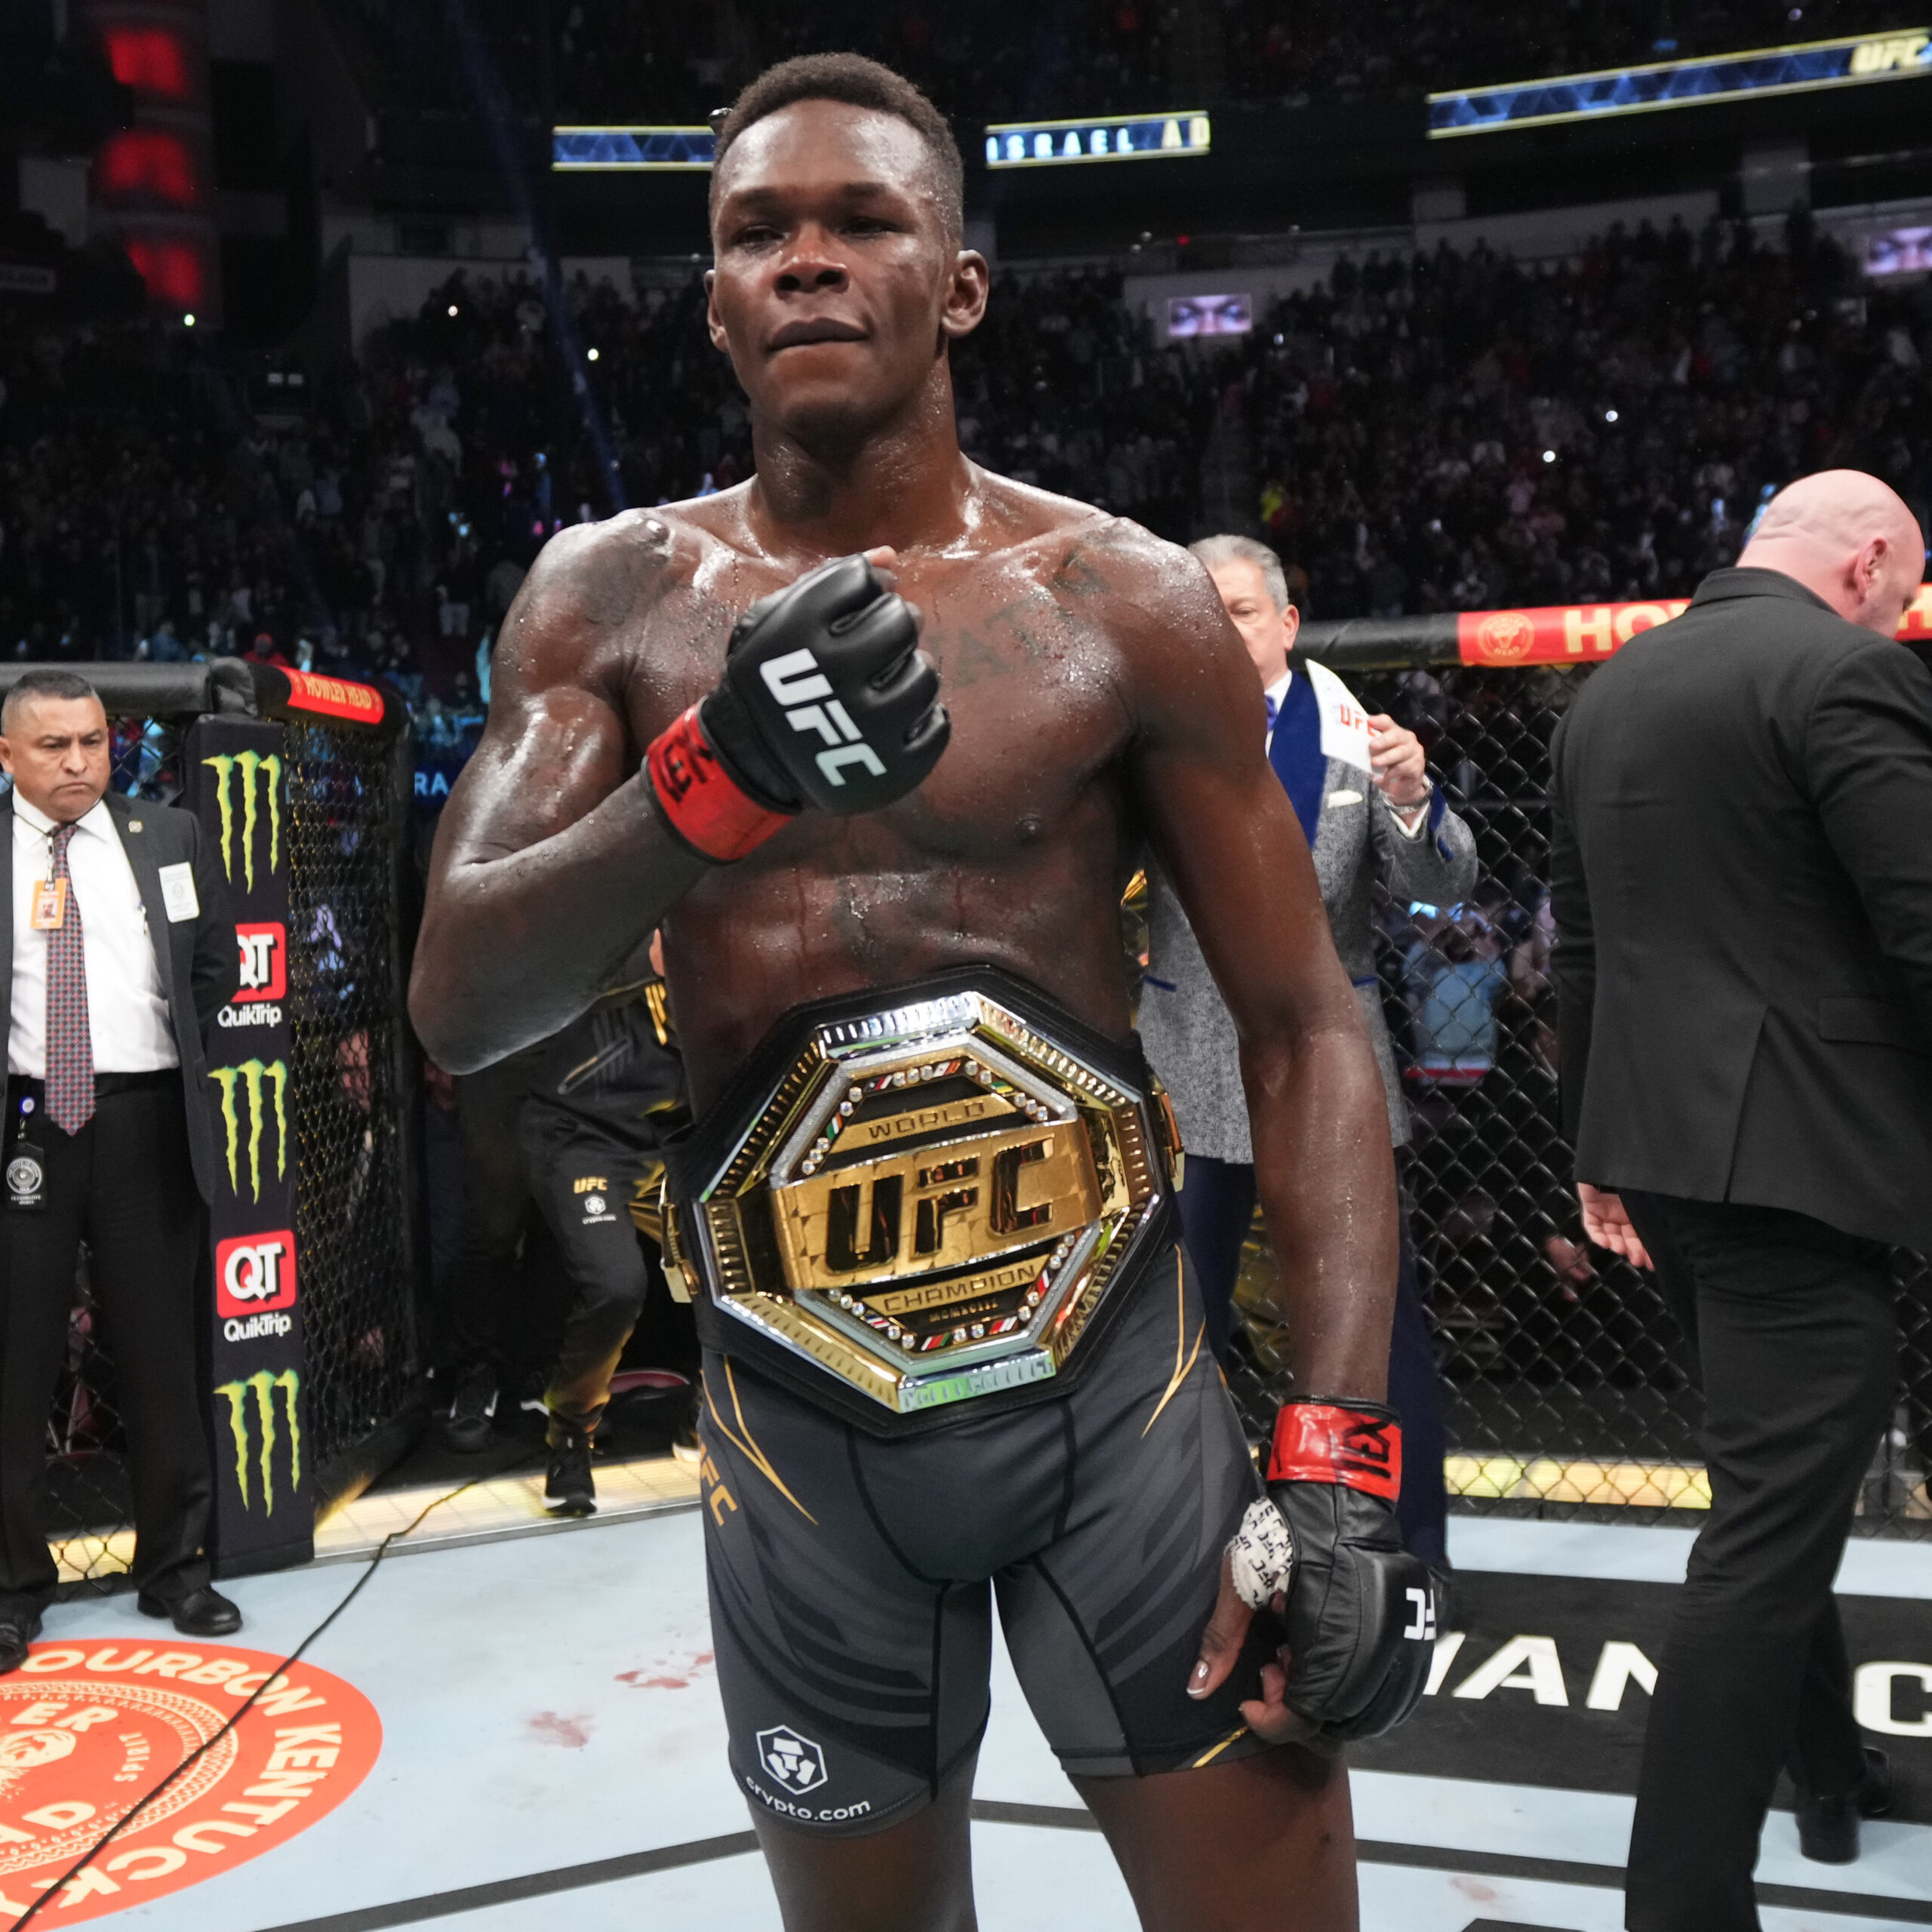 Israel Adesanya beats Cannonier to retain UFC middleweight title